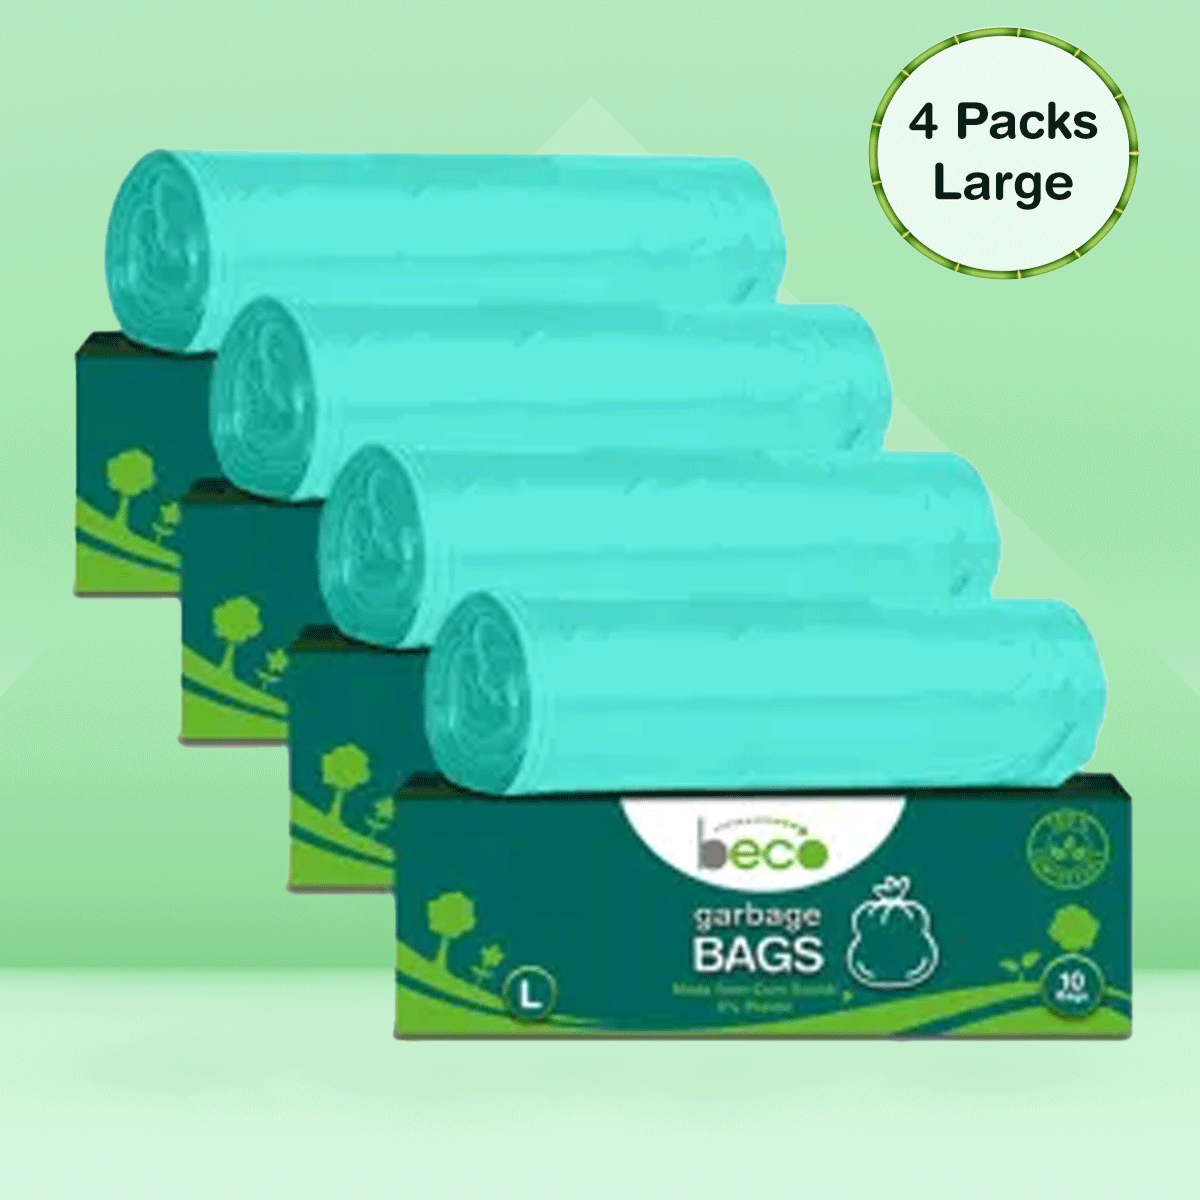 Compostable Large Garbage Bags - Pack of 4 - 10 bags/roll | Beco